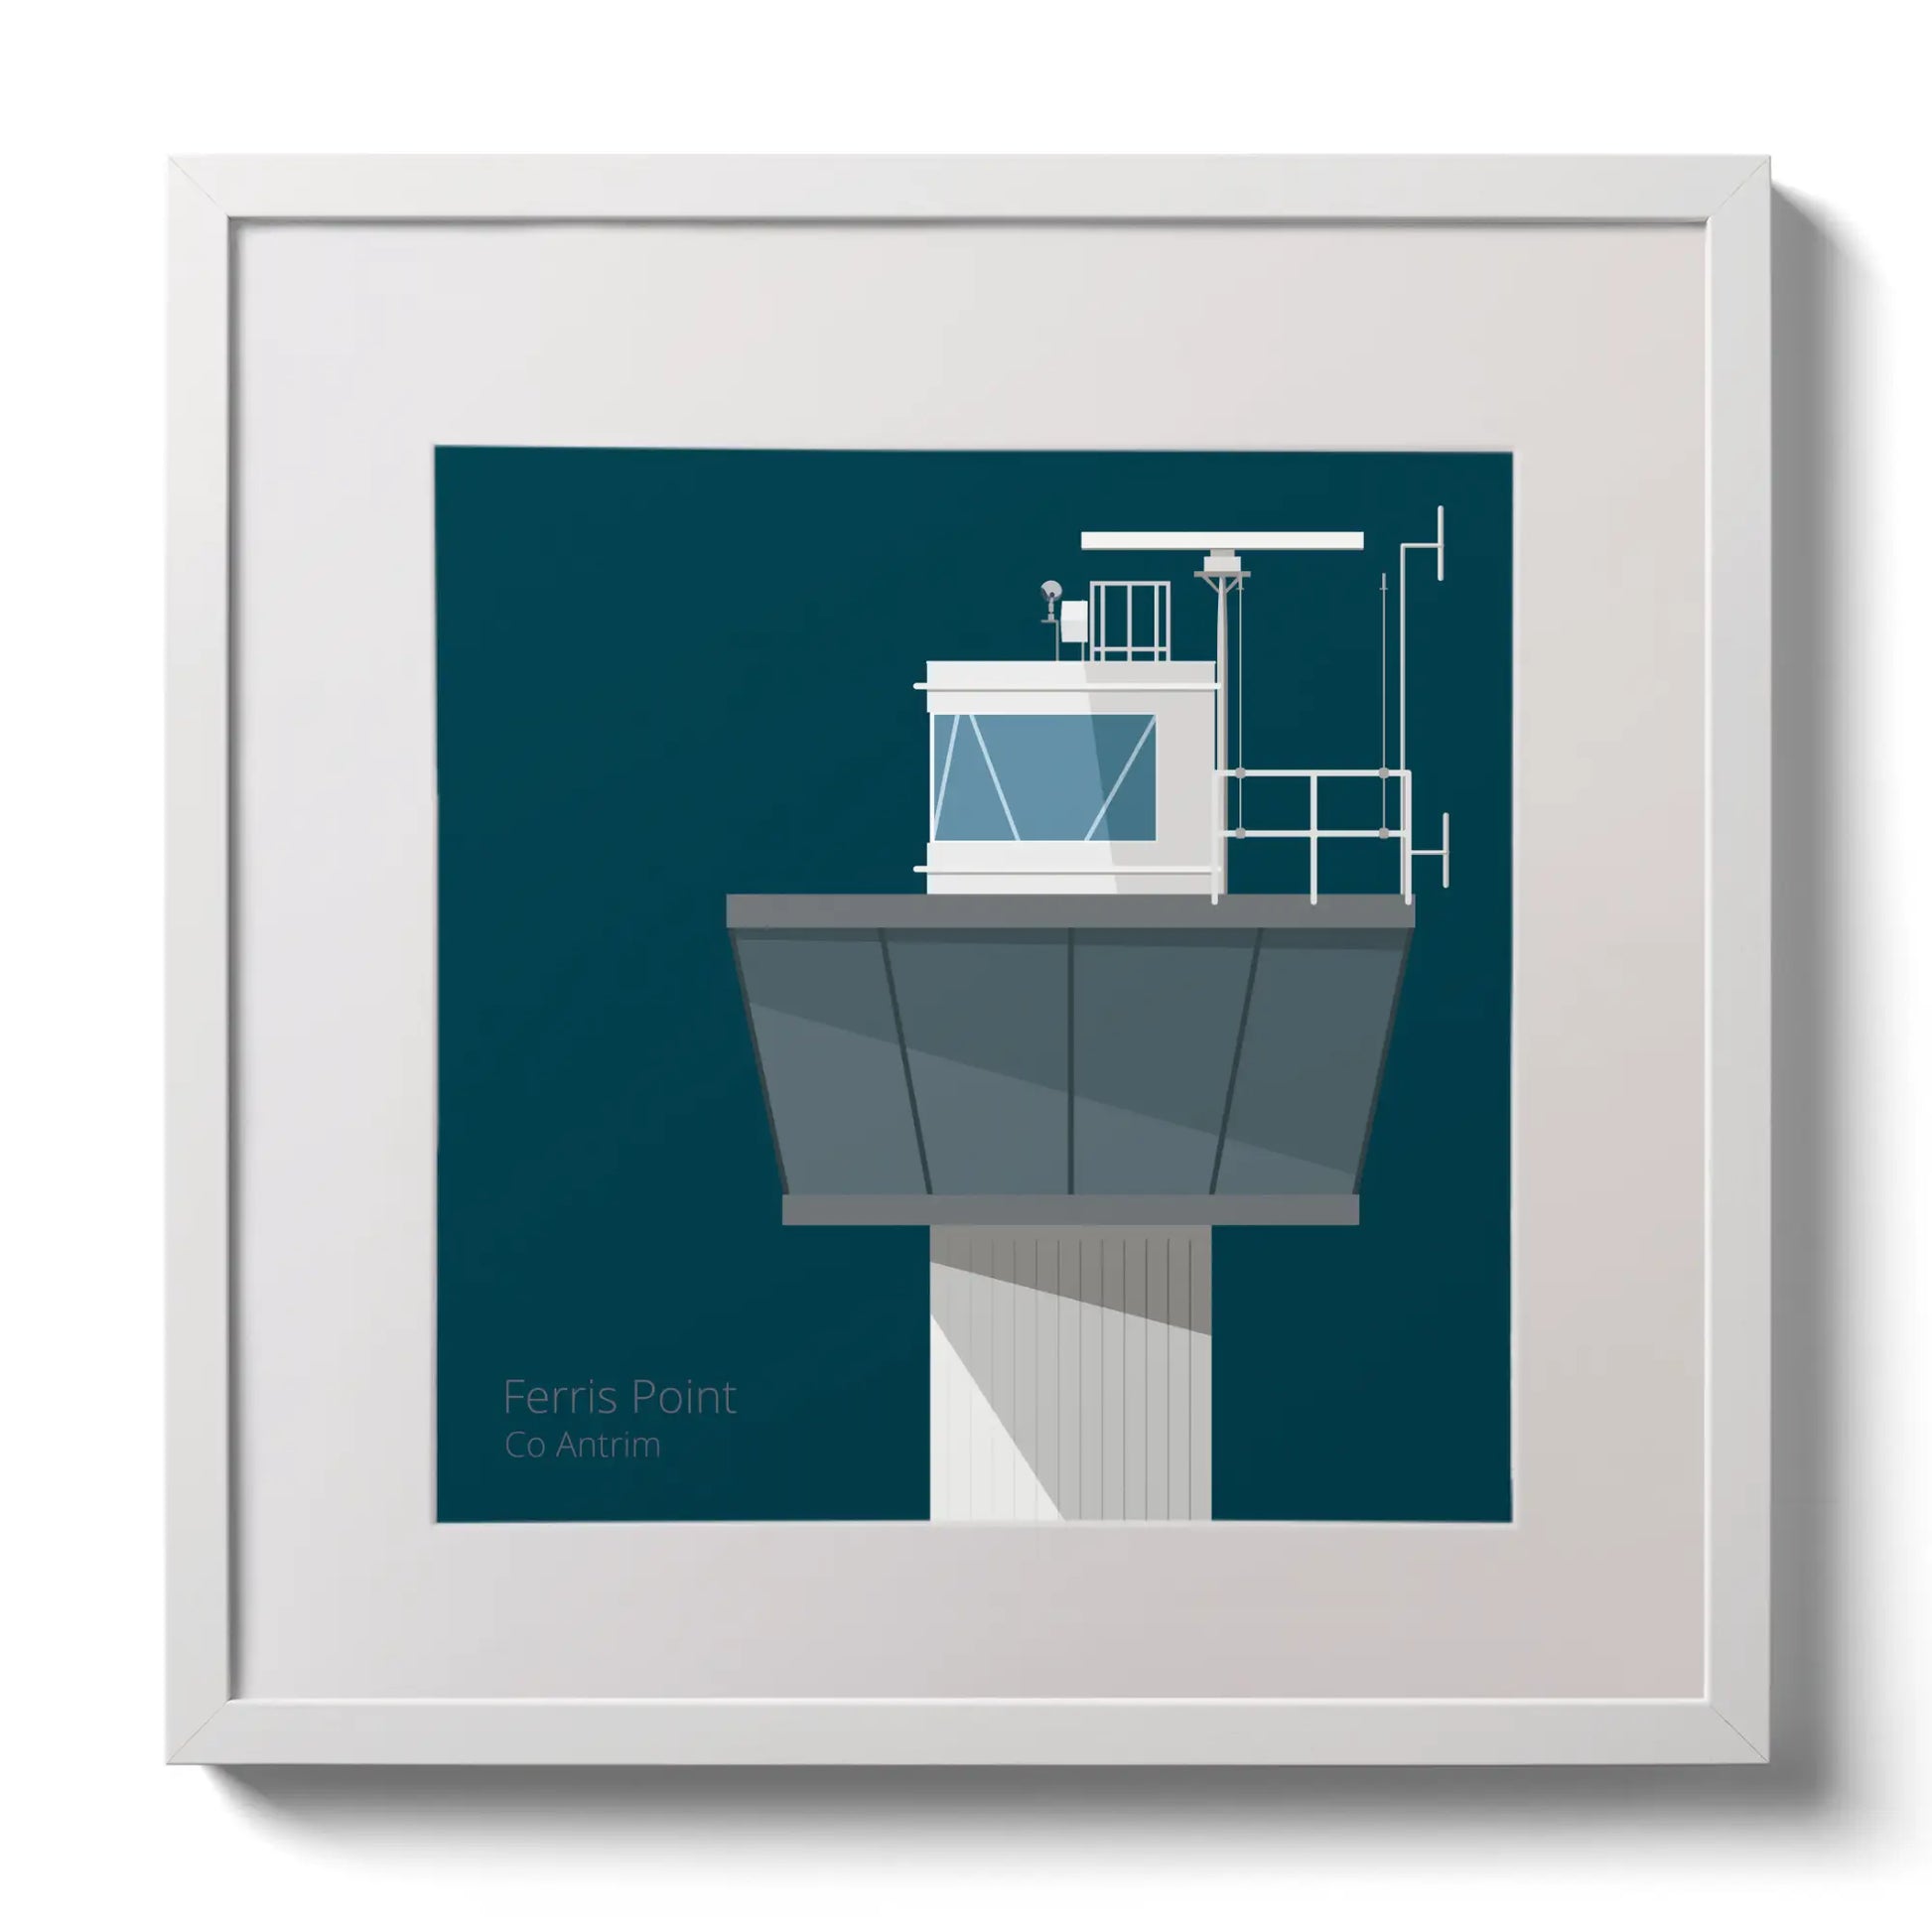 Illustration of Ferris Point lighthouse on a midnight blue background,  in a white square frame measuring 30x30cm.